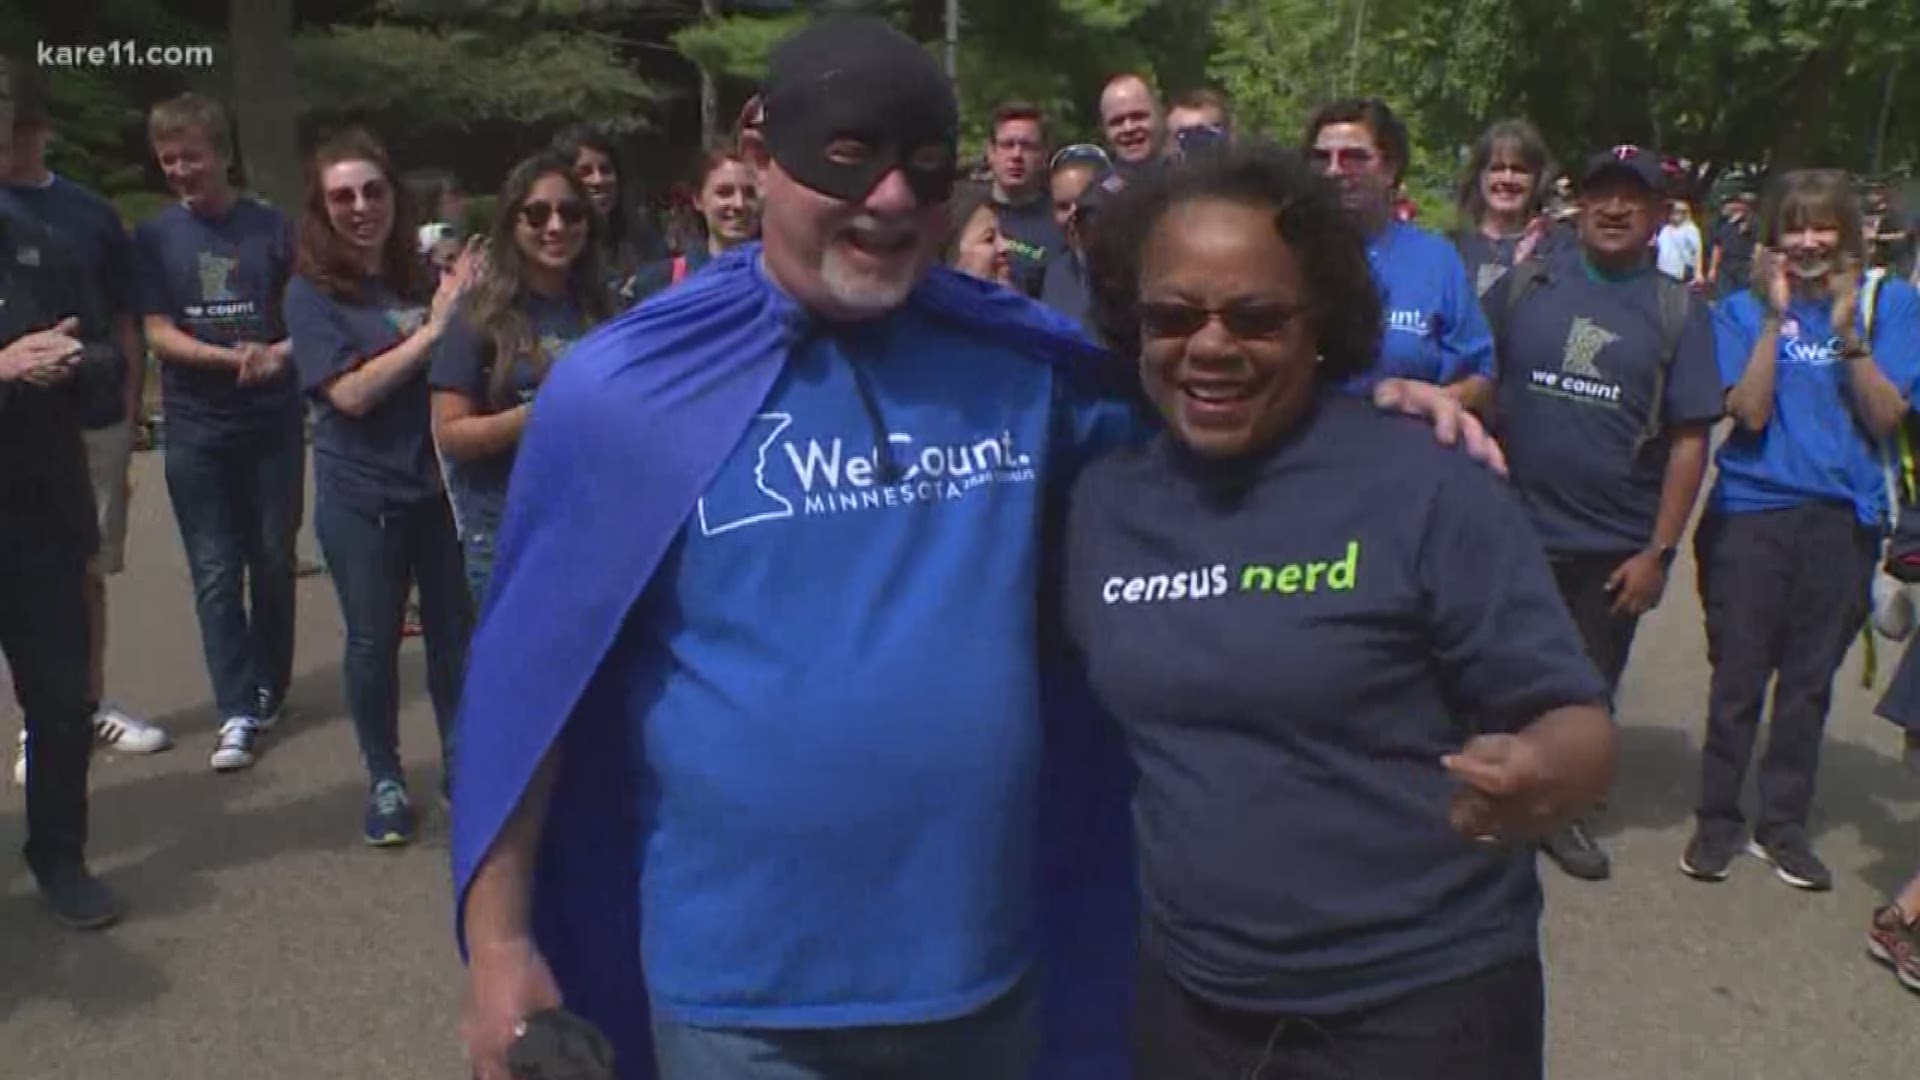 Self-described "Census Nerds" hit the Minnesota State Fair Tuesday to spread the word about the importance of an accurate 2020 Census. They even brought a caped superhero dubbed "Census Man" who as part of the public awareness effort.